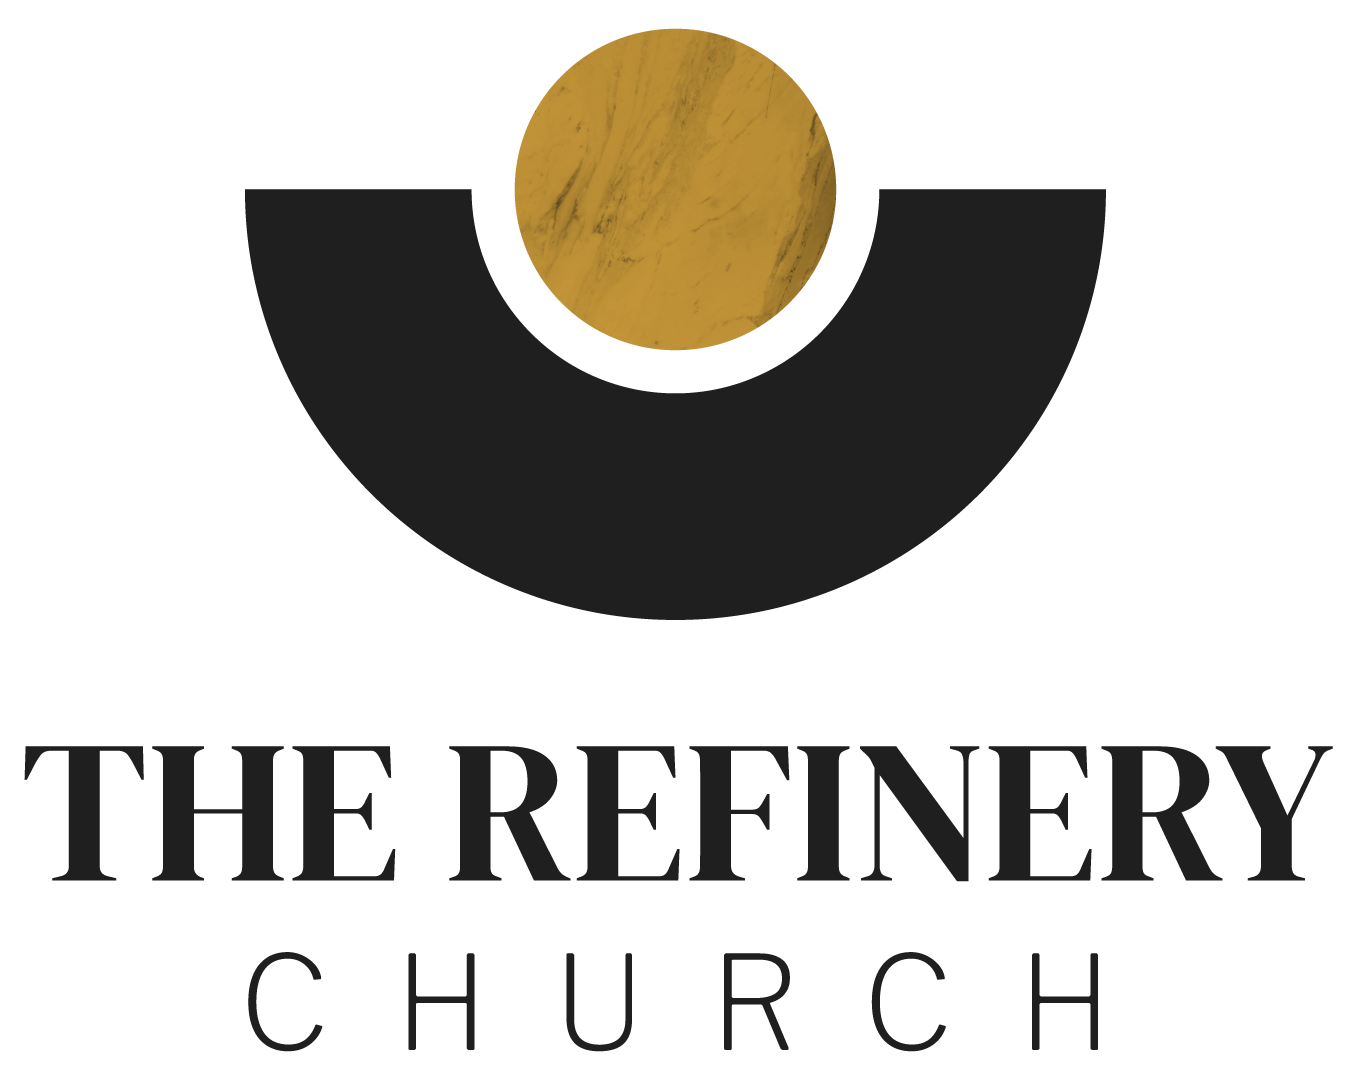 Welcome to The Refinery Church in Beautiful Temecula, Ca